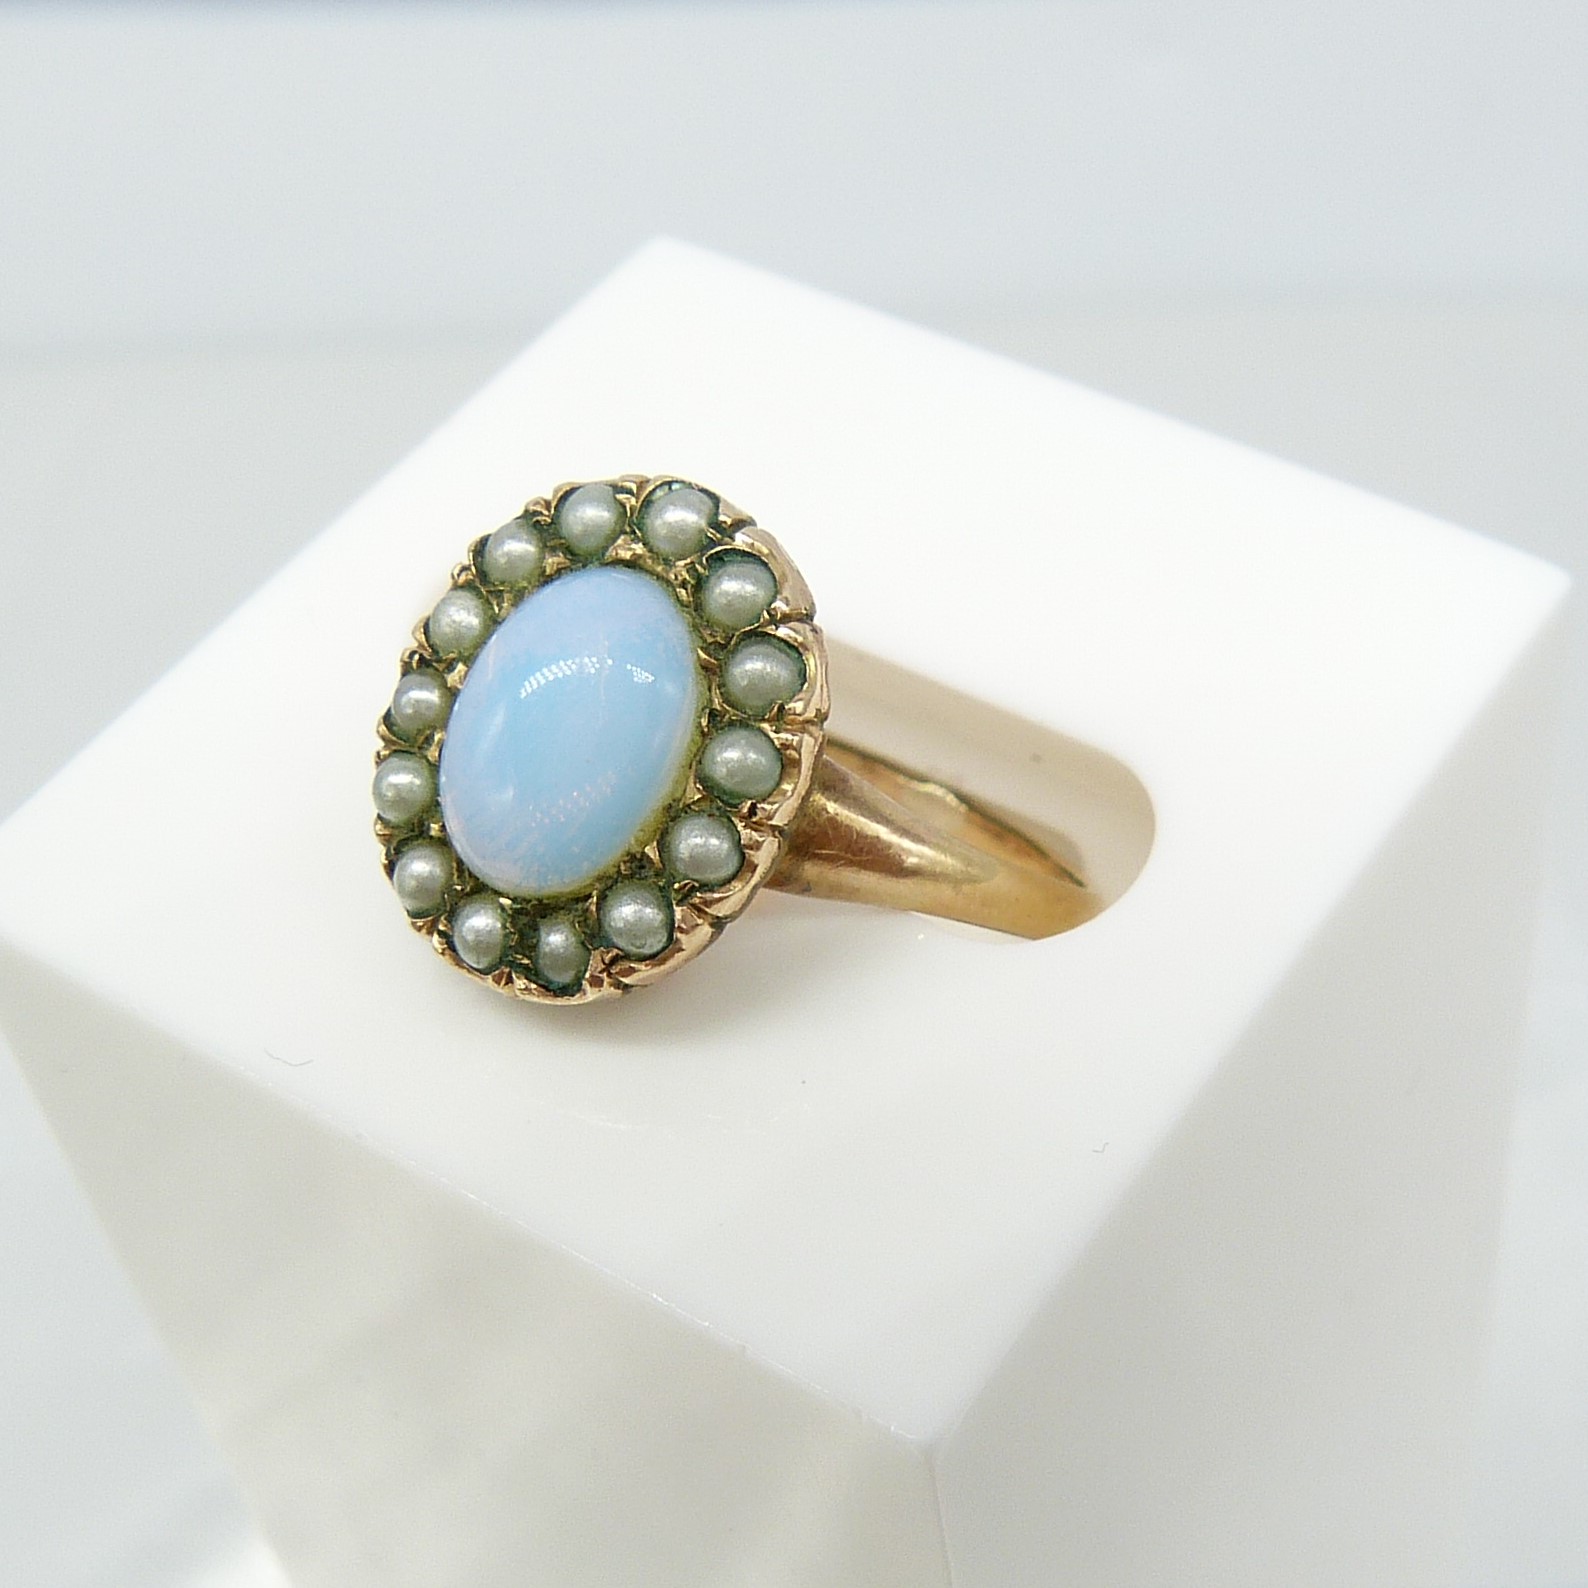 Vintage Victorian-Style Halo Ring Set With Opalite and Seed Pearls - Image 3 of 6